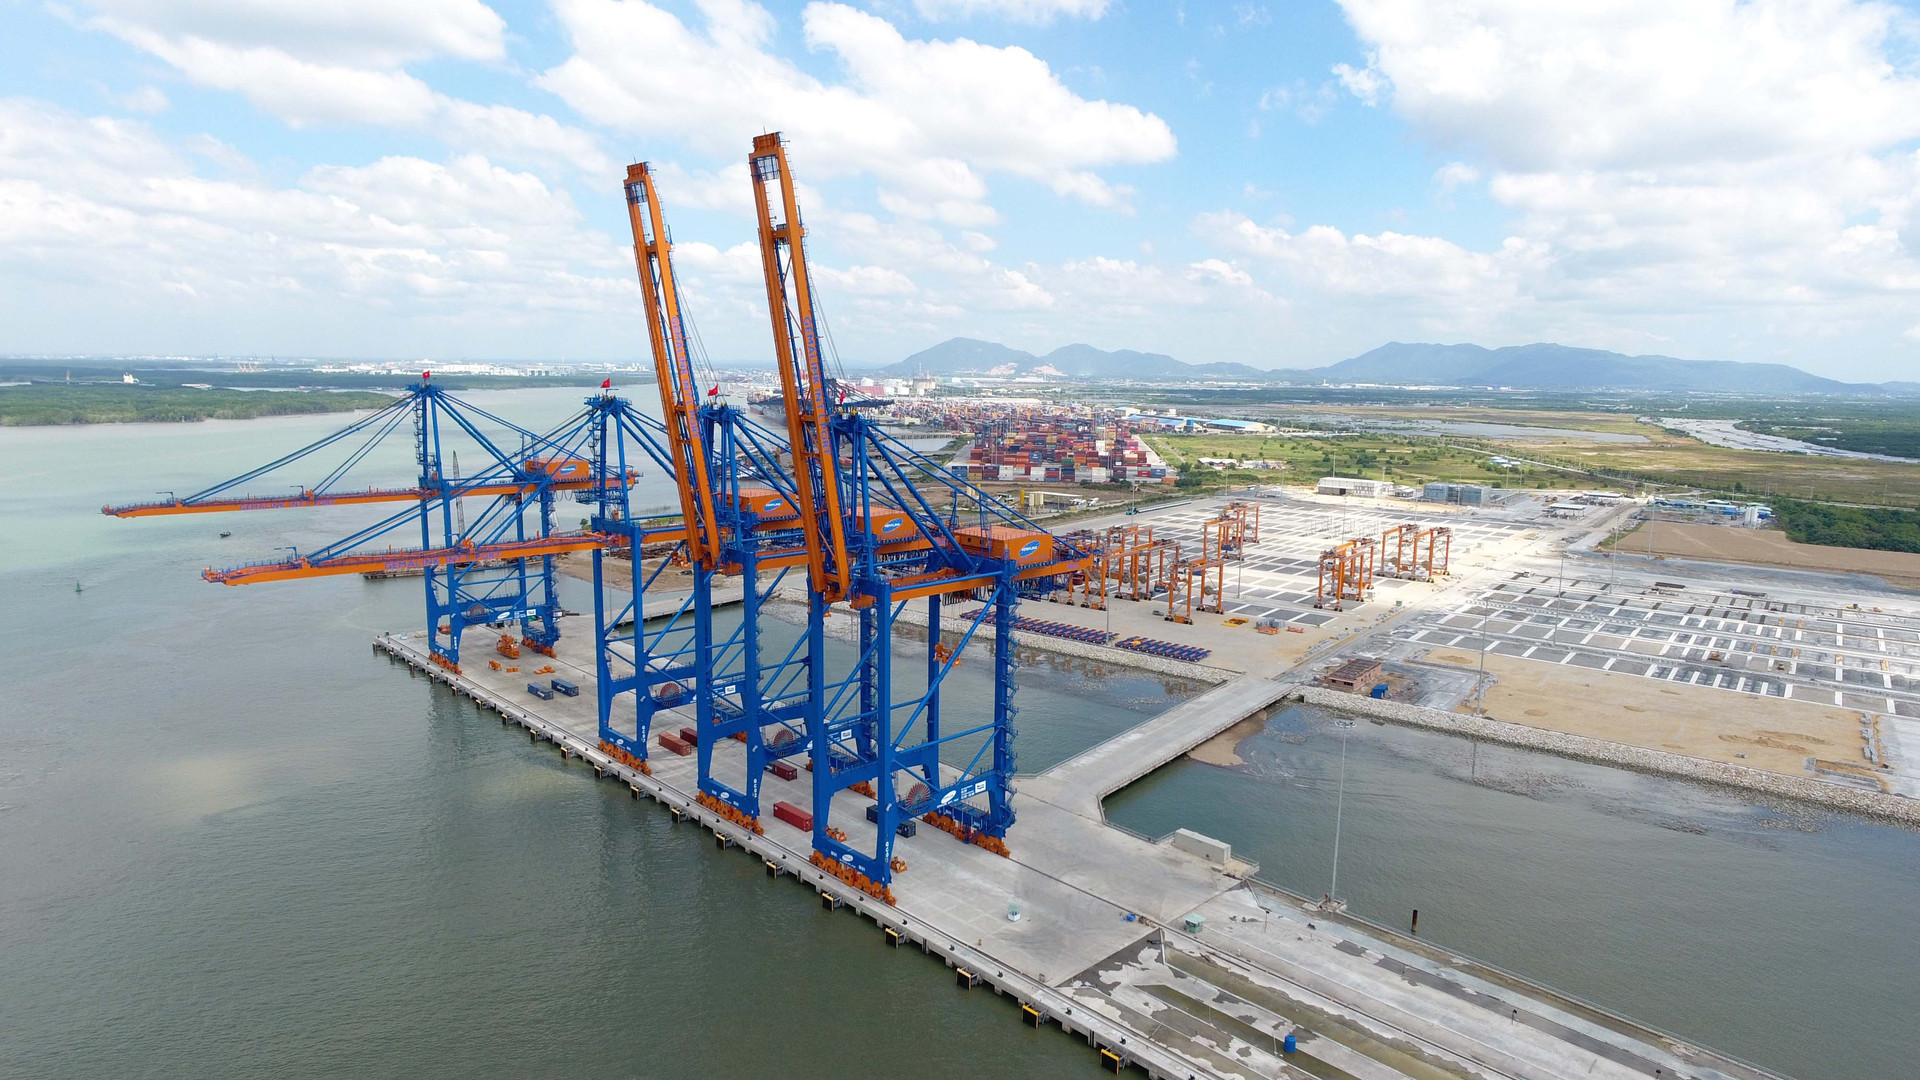 The last two RMQC cranes of Gemalink project are delivered to Gemadept - CMA CGM